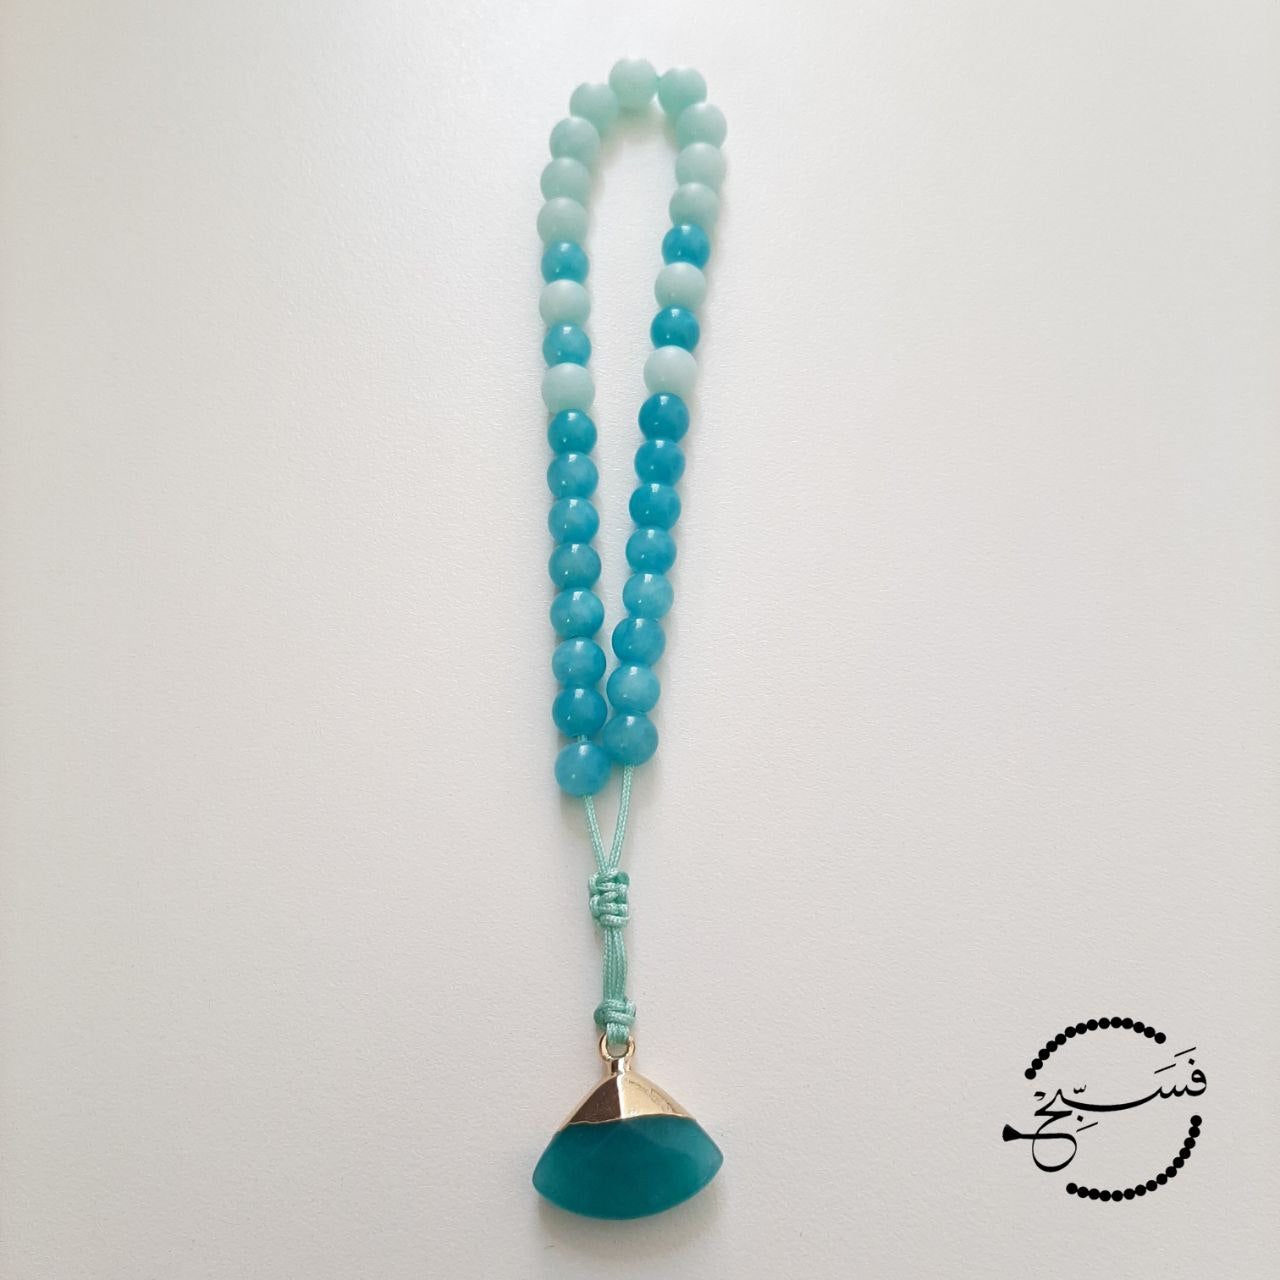 Amazonite beads with a fan-shaped pendant.  Features an adjustable knot.  33 beads (6mm beads)